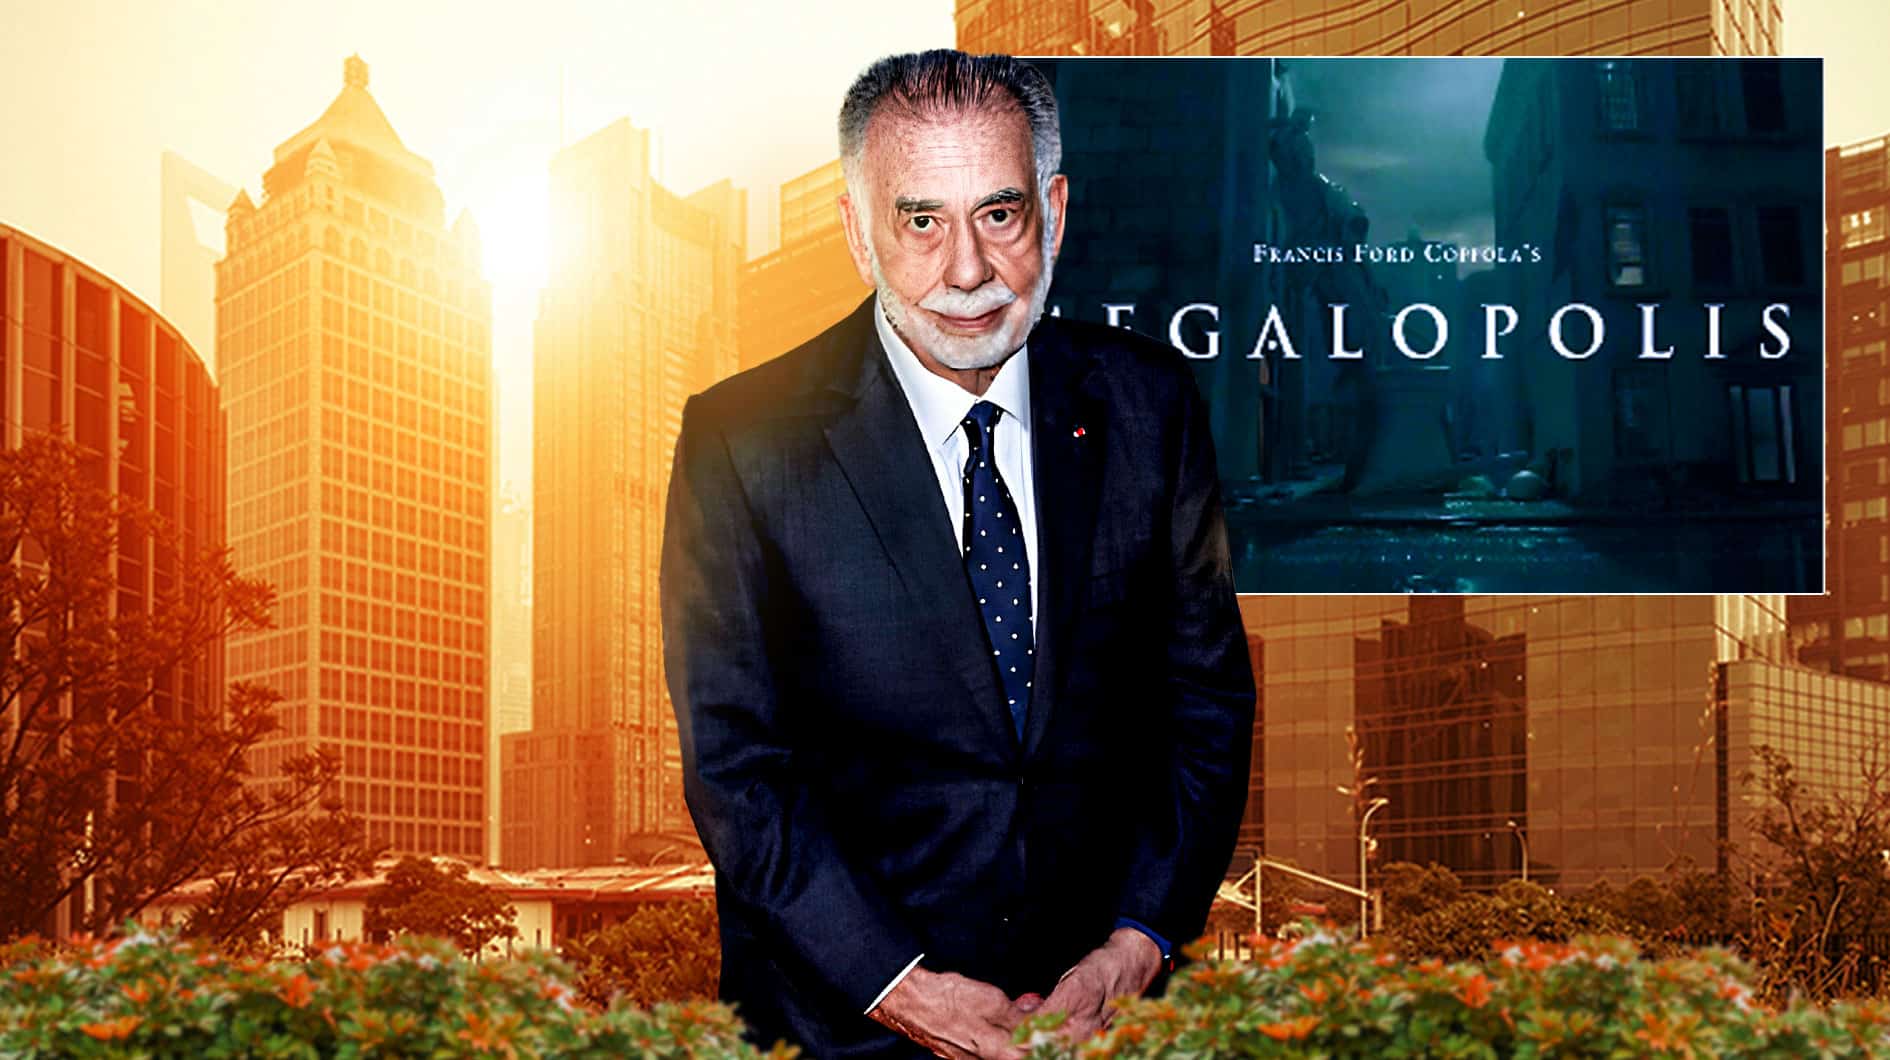 Francis Ford Coppola and Megalopolis poster.